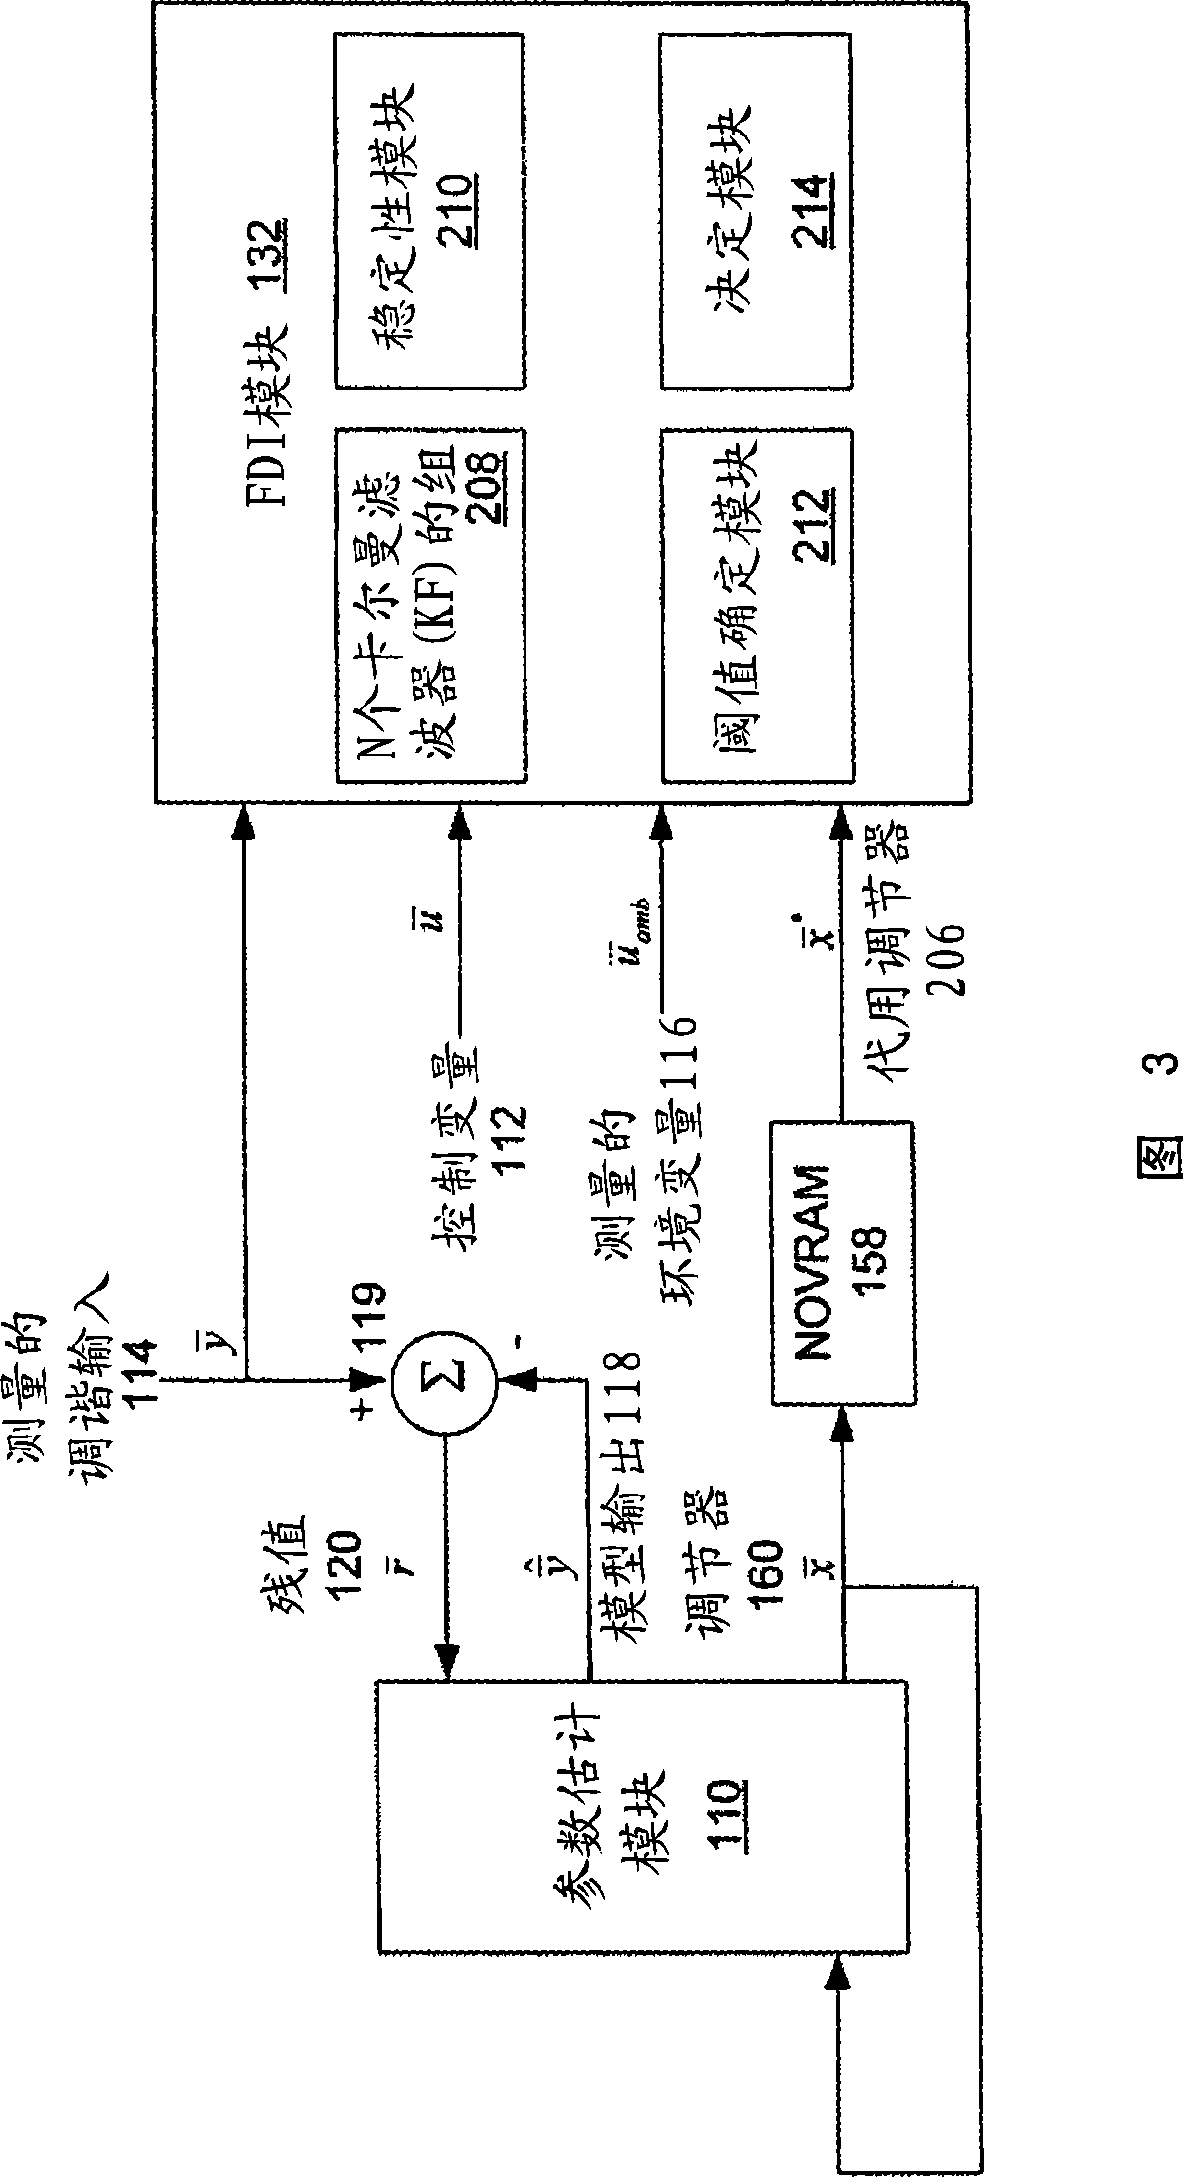 Systems and methods for model-based sensor fault detection and isolation